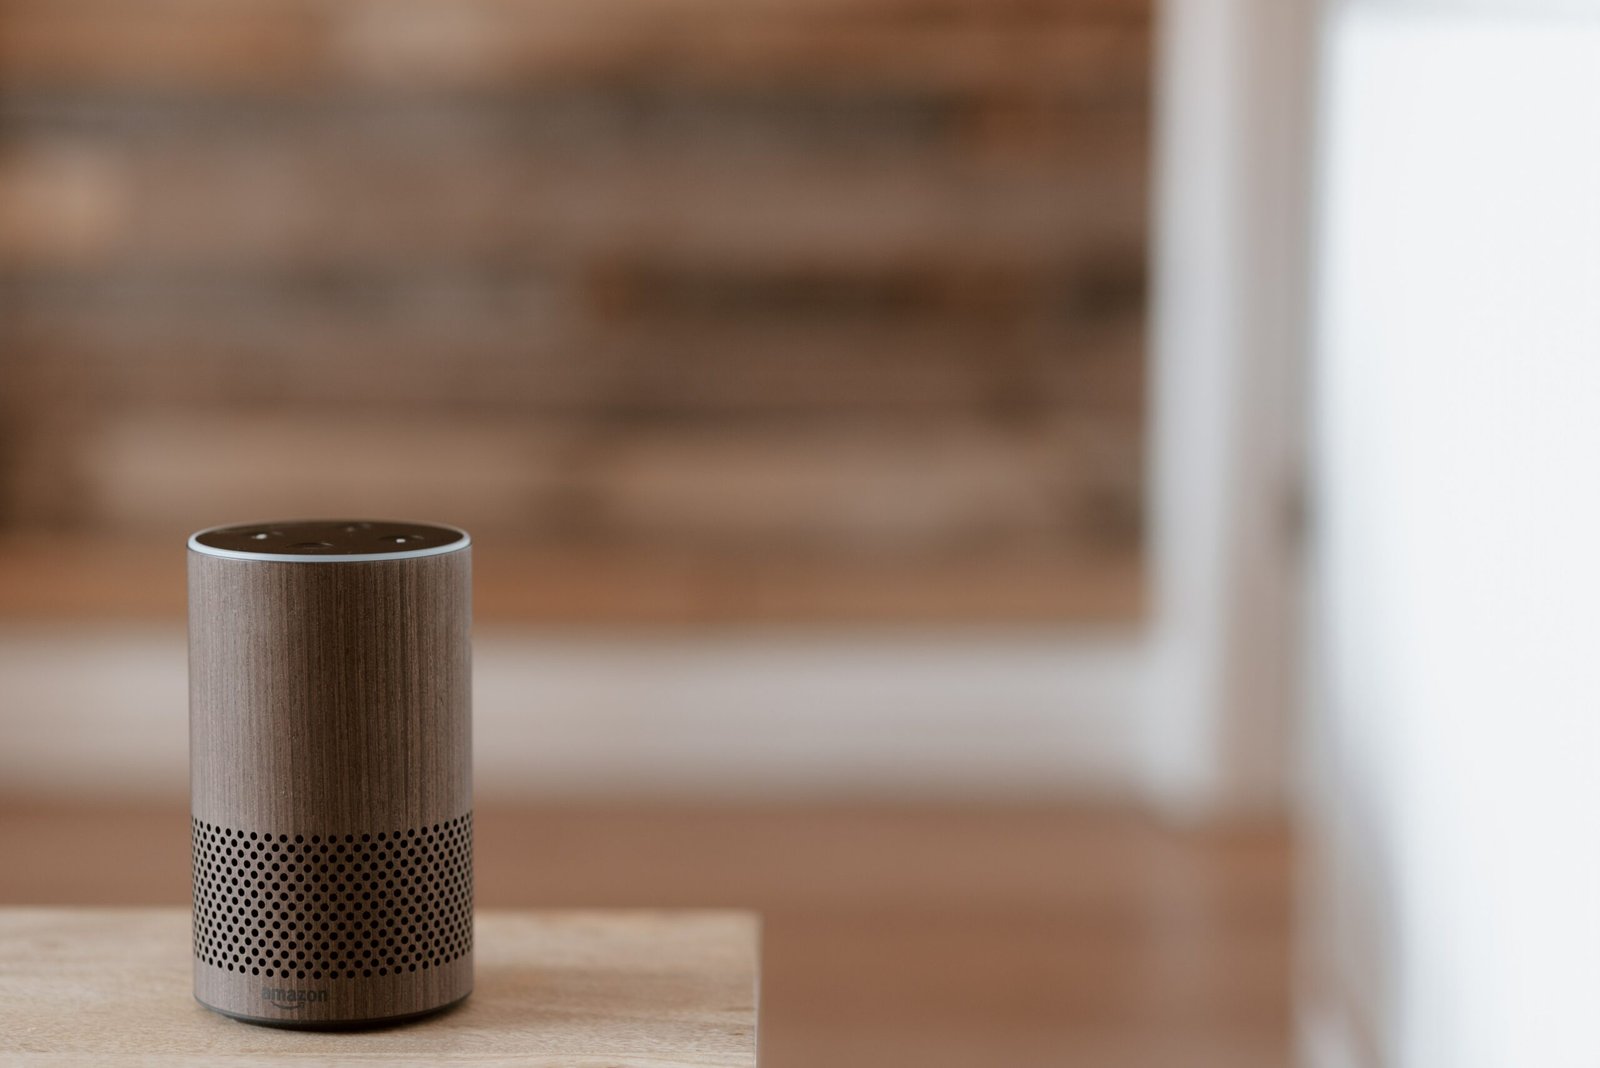 Can Alexa Be Set To Have Custom Alarms?